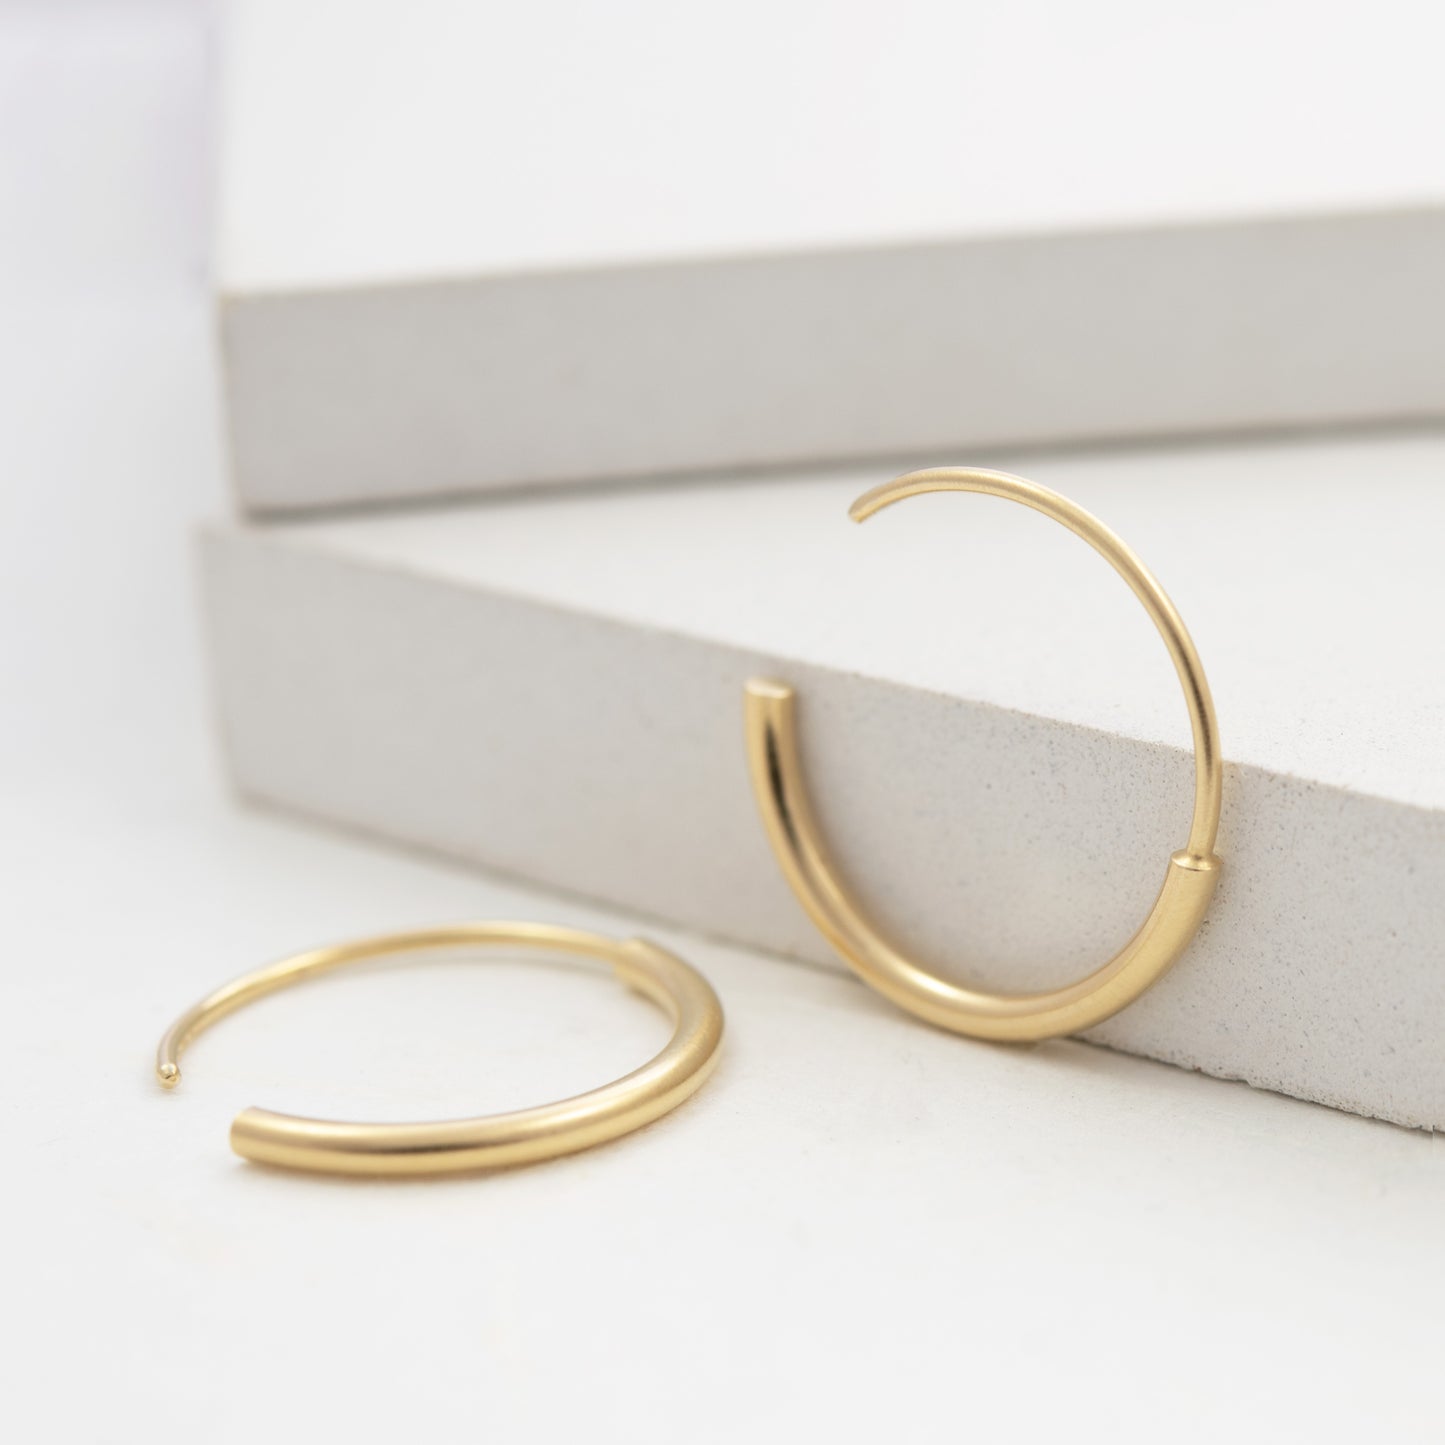 The perfect gold hoops by AgJc